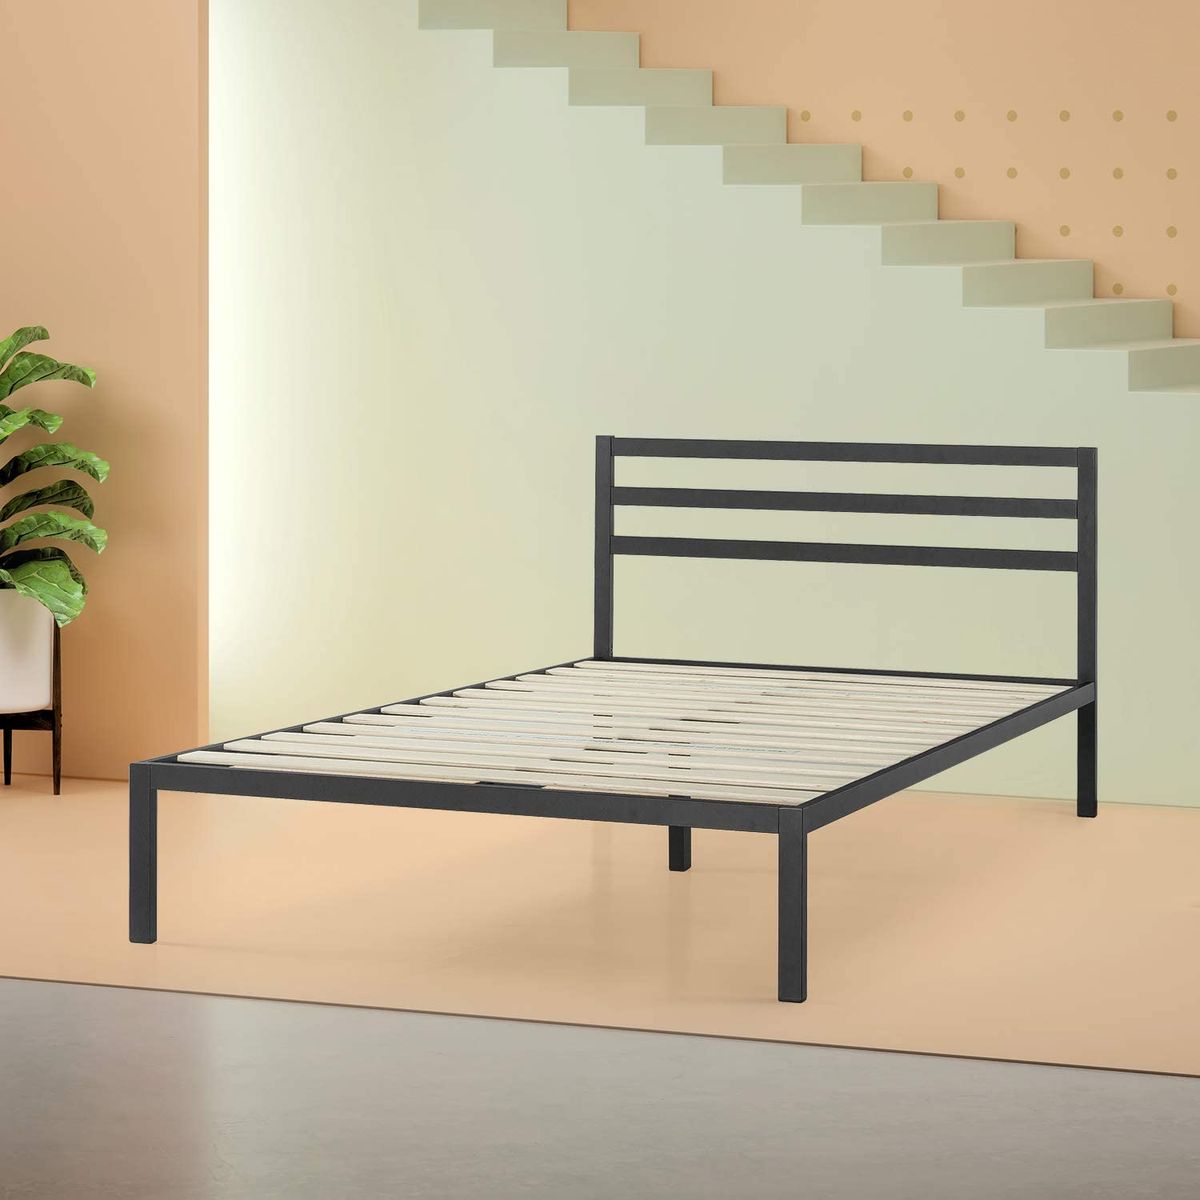 19 Best Metal Bed Frames 2020 The, Metal Bed Frame With Headboard